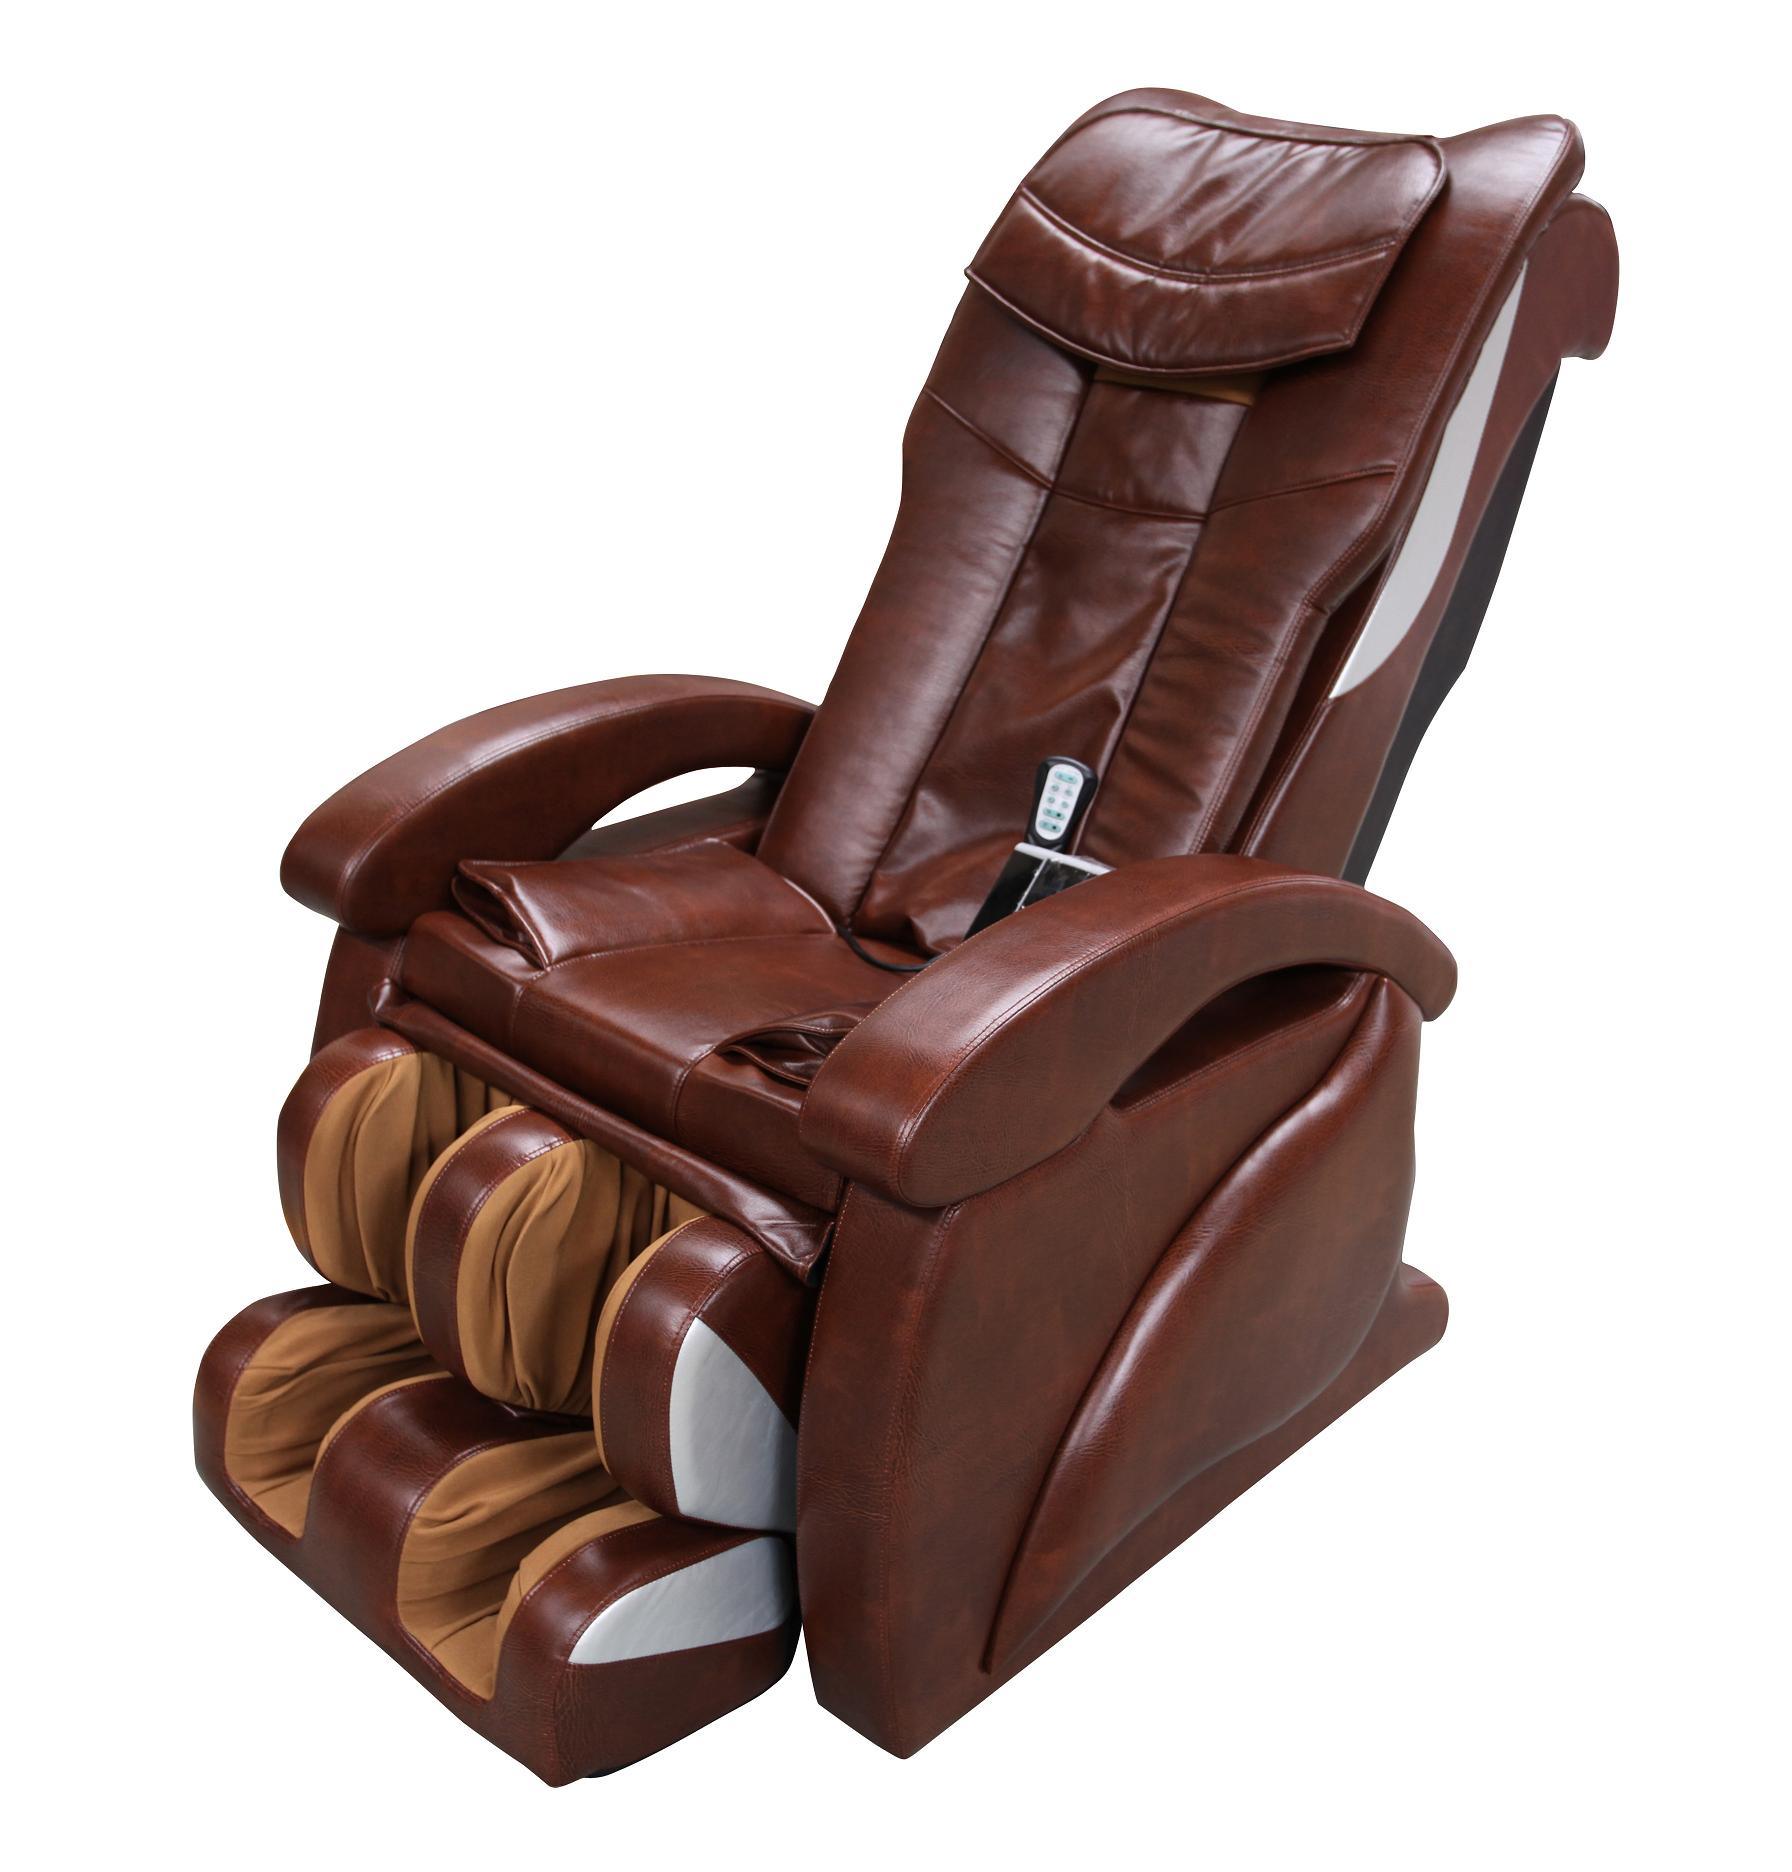 electric massage chair